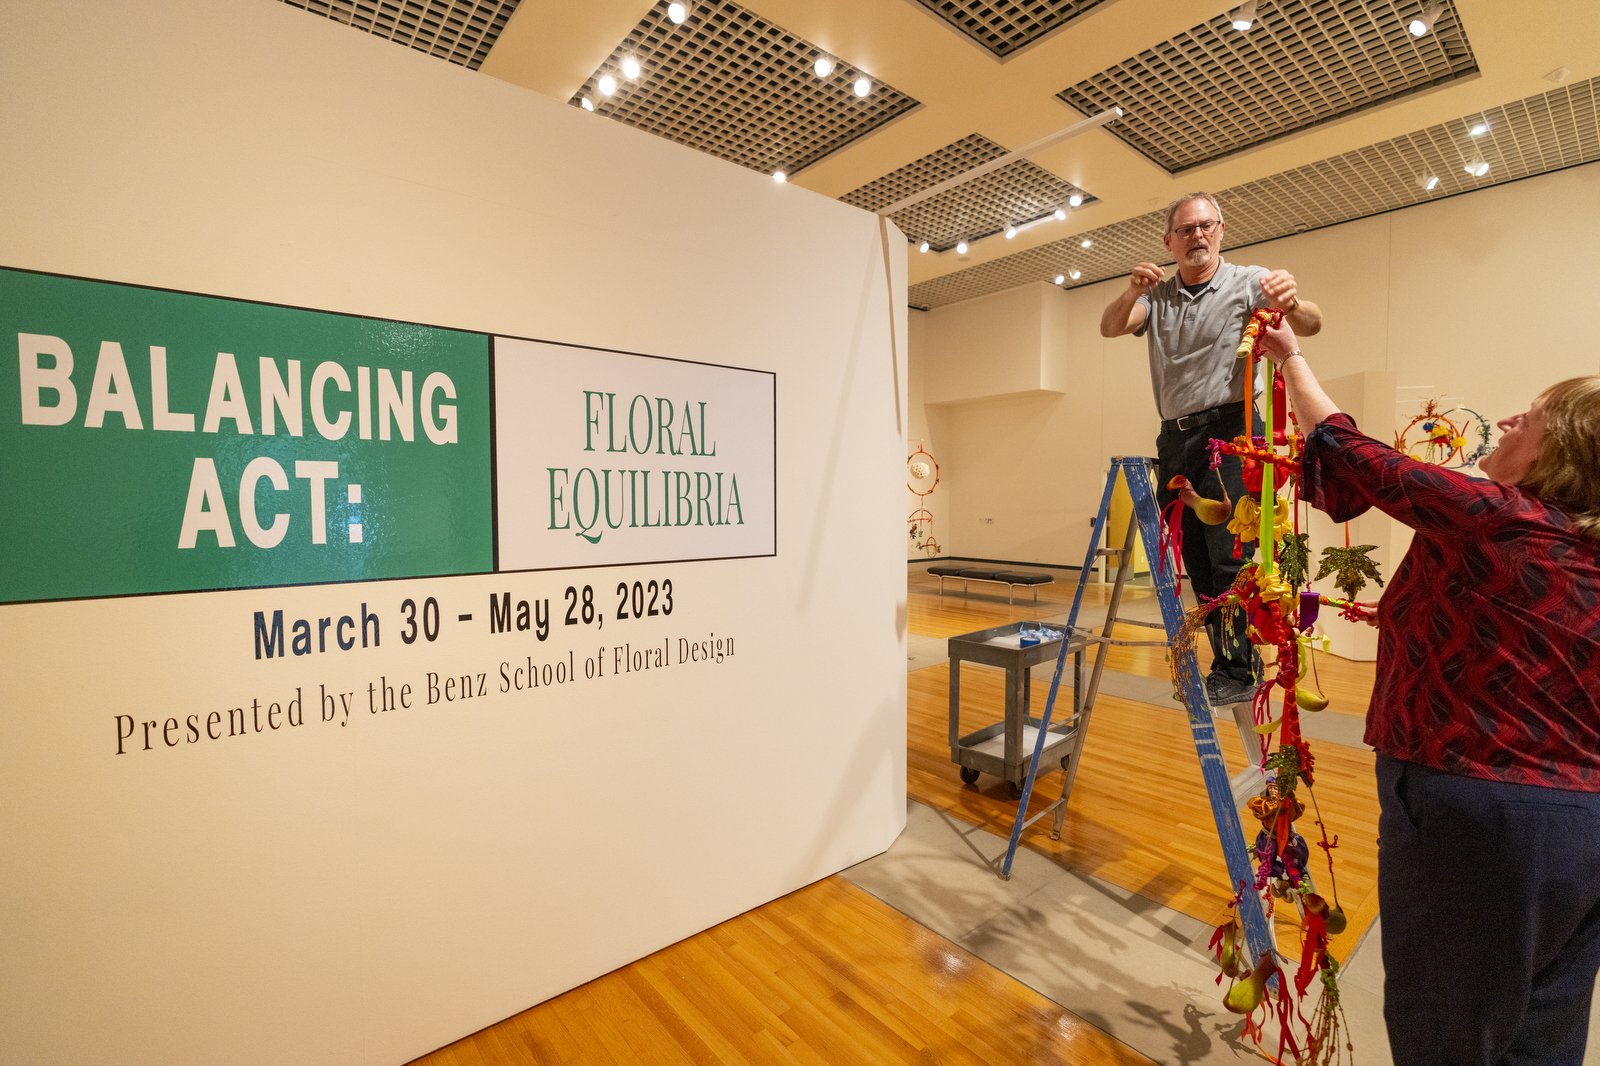 William McKinley hangs a floral sculpture in front of a sign reading Balancing Act: FLoral Equlibria. March 30-May28, 2023, Presented by the Benz School of Floral Design